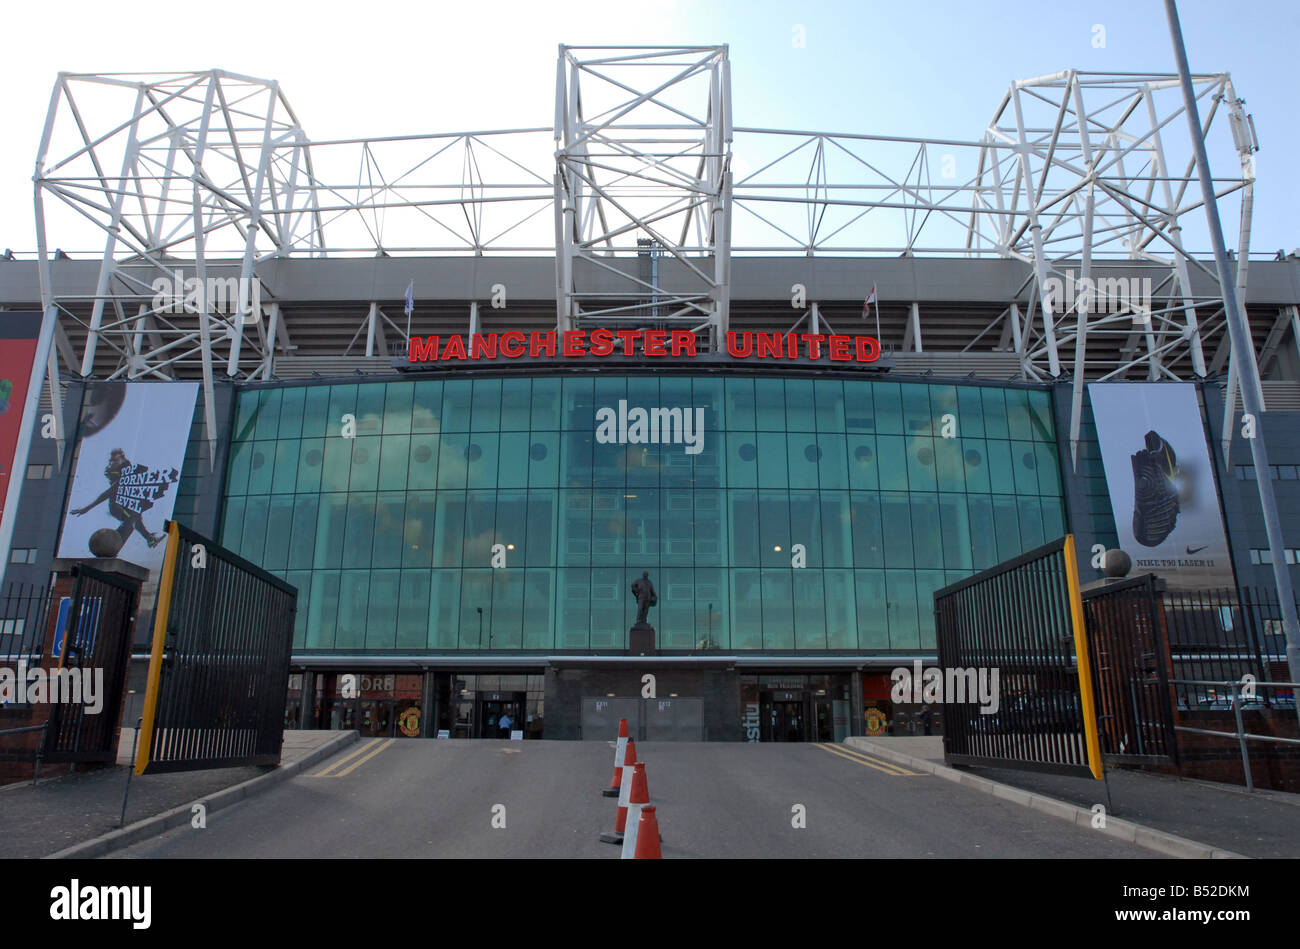 Old Trafford Manchester united Football Club mufc Stockfoto